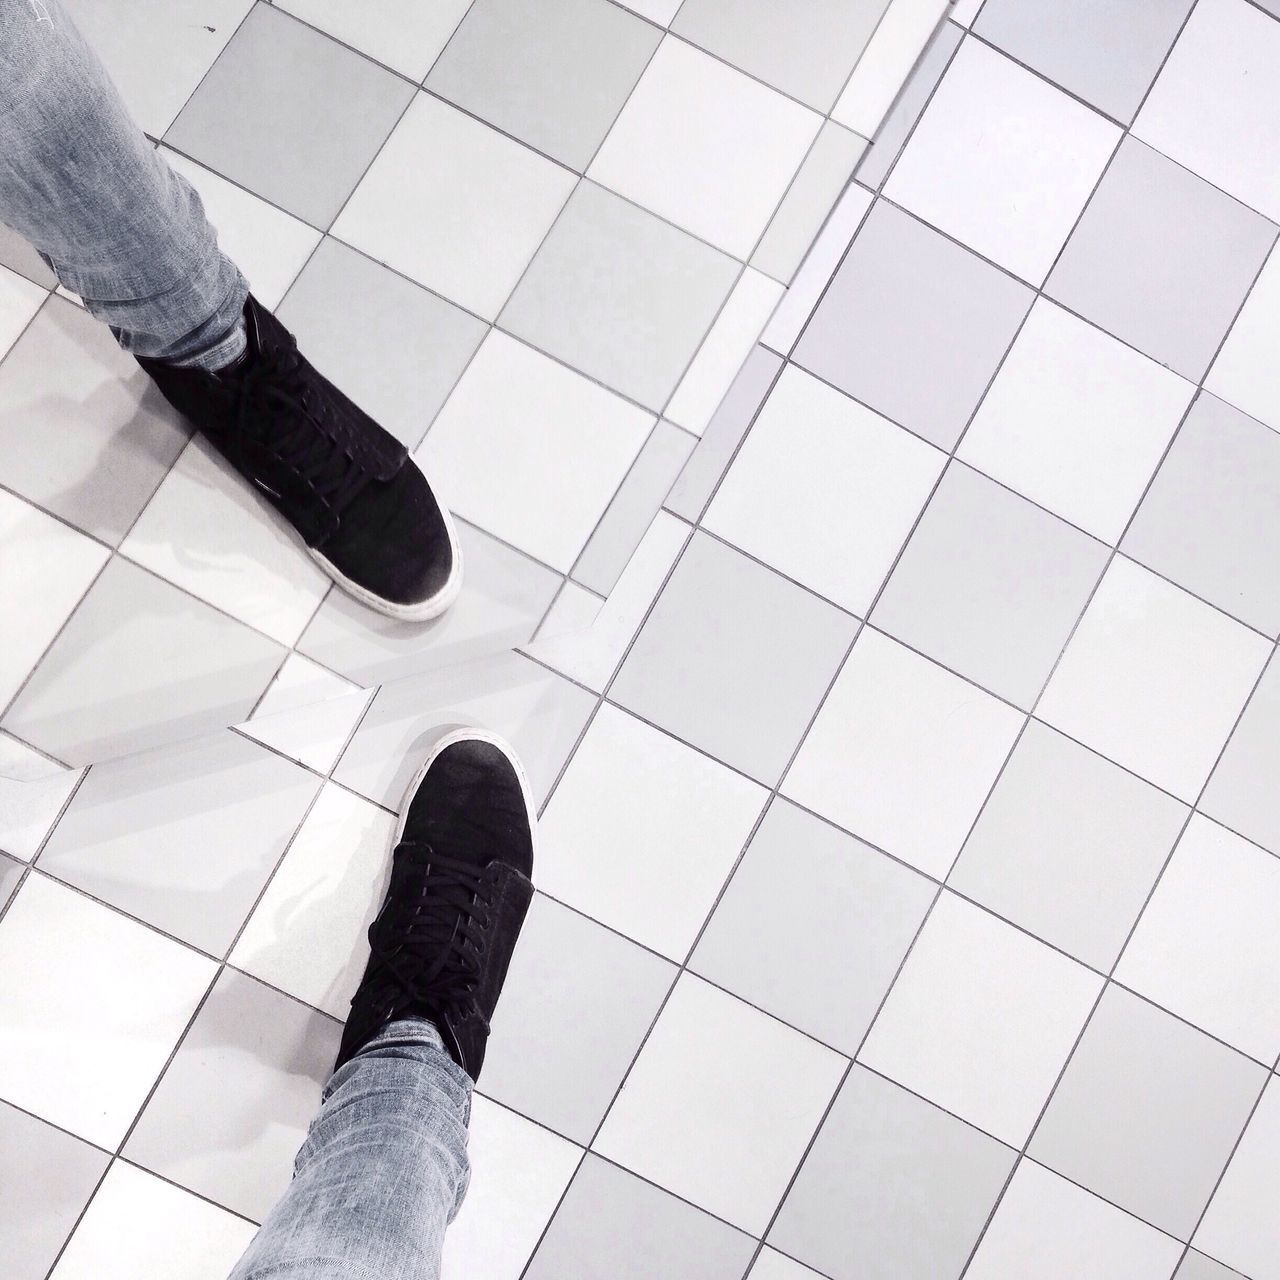 low section, person, shoe, high angle view, modern, low angle view, personal perspective, tiled floor, part of, reflection, lifestyles, standing, men, unrecognizable person, human foot, pattern, flooring